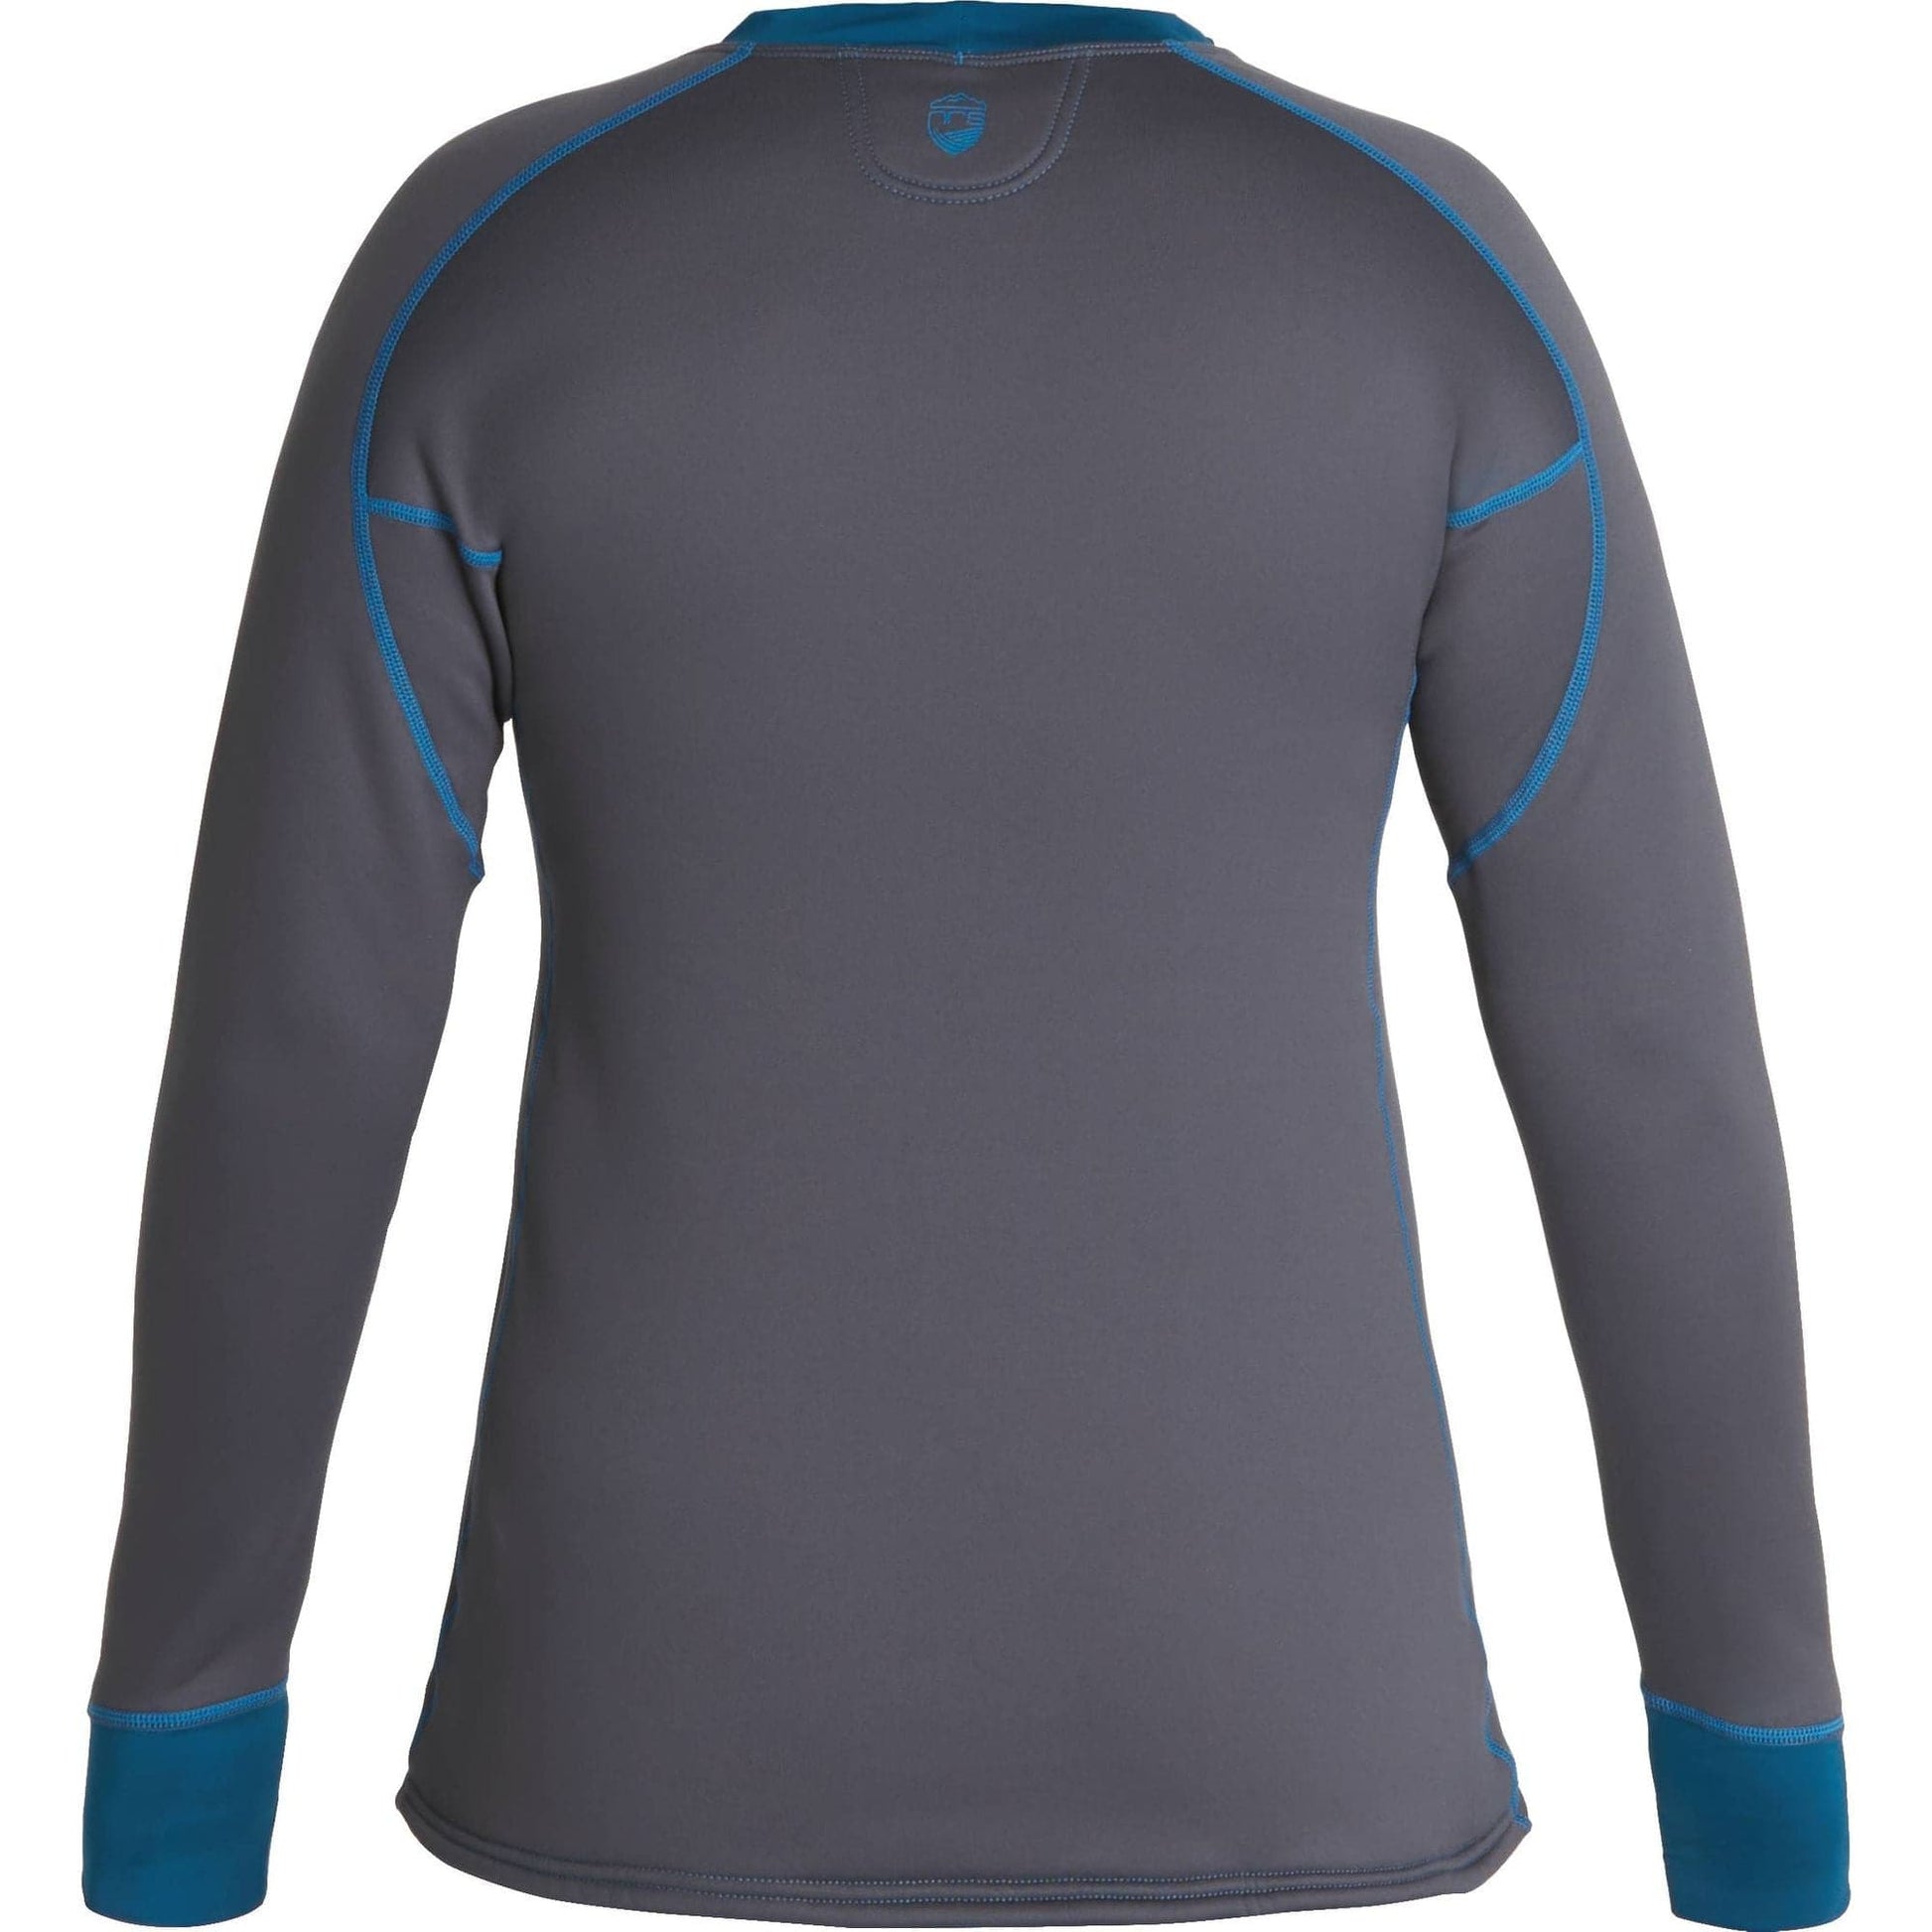 Featuring the Expedition Fleece W's shirt, women's thermal layering manufactured by NRS shown here from a second angle.